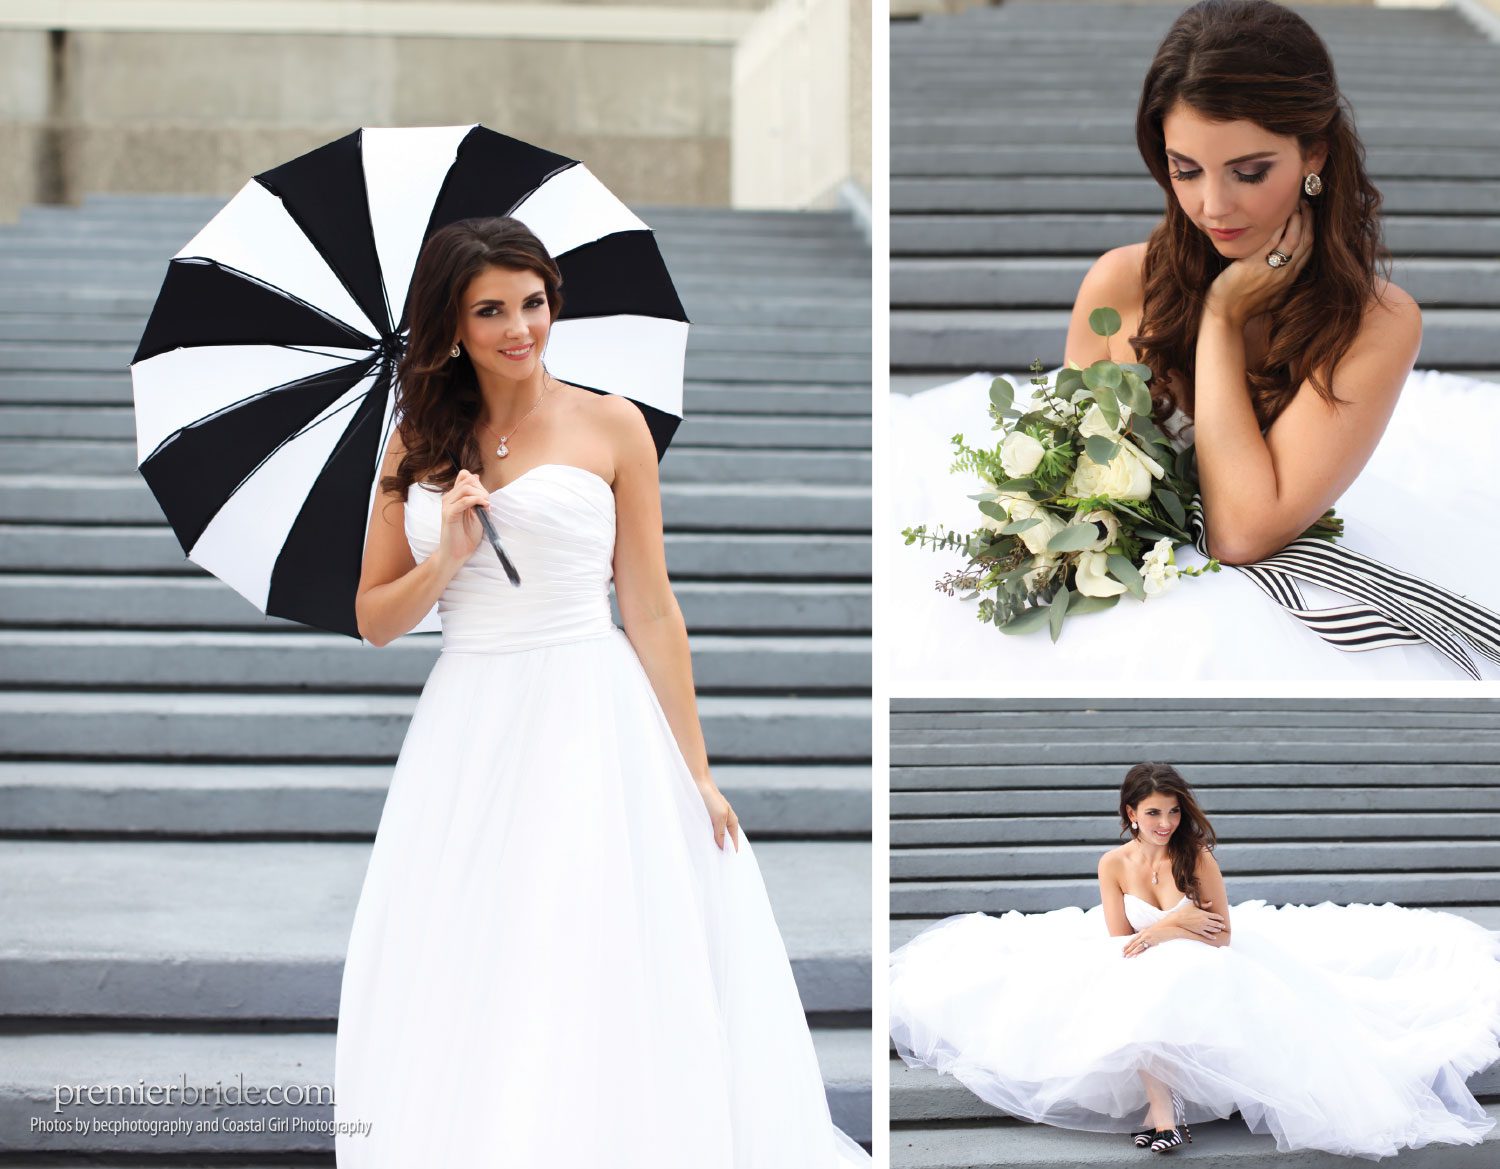 Love Bridal Boutique, photos by becphotography